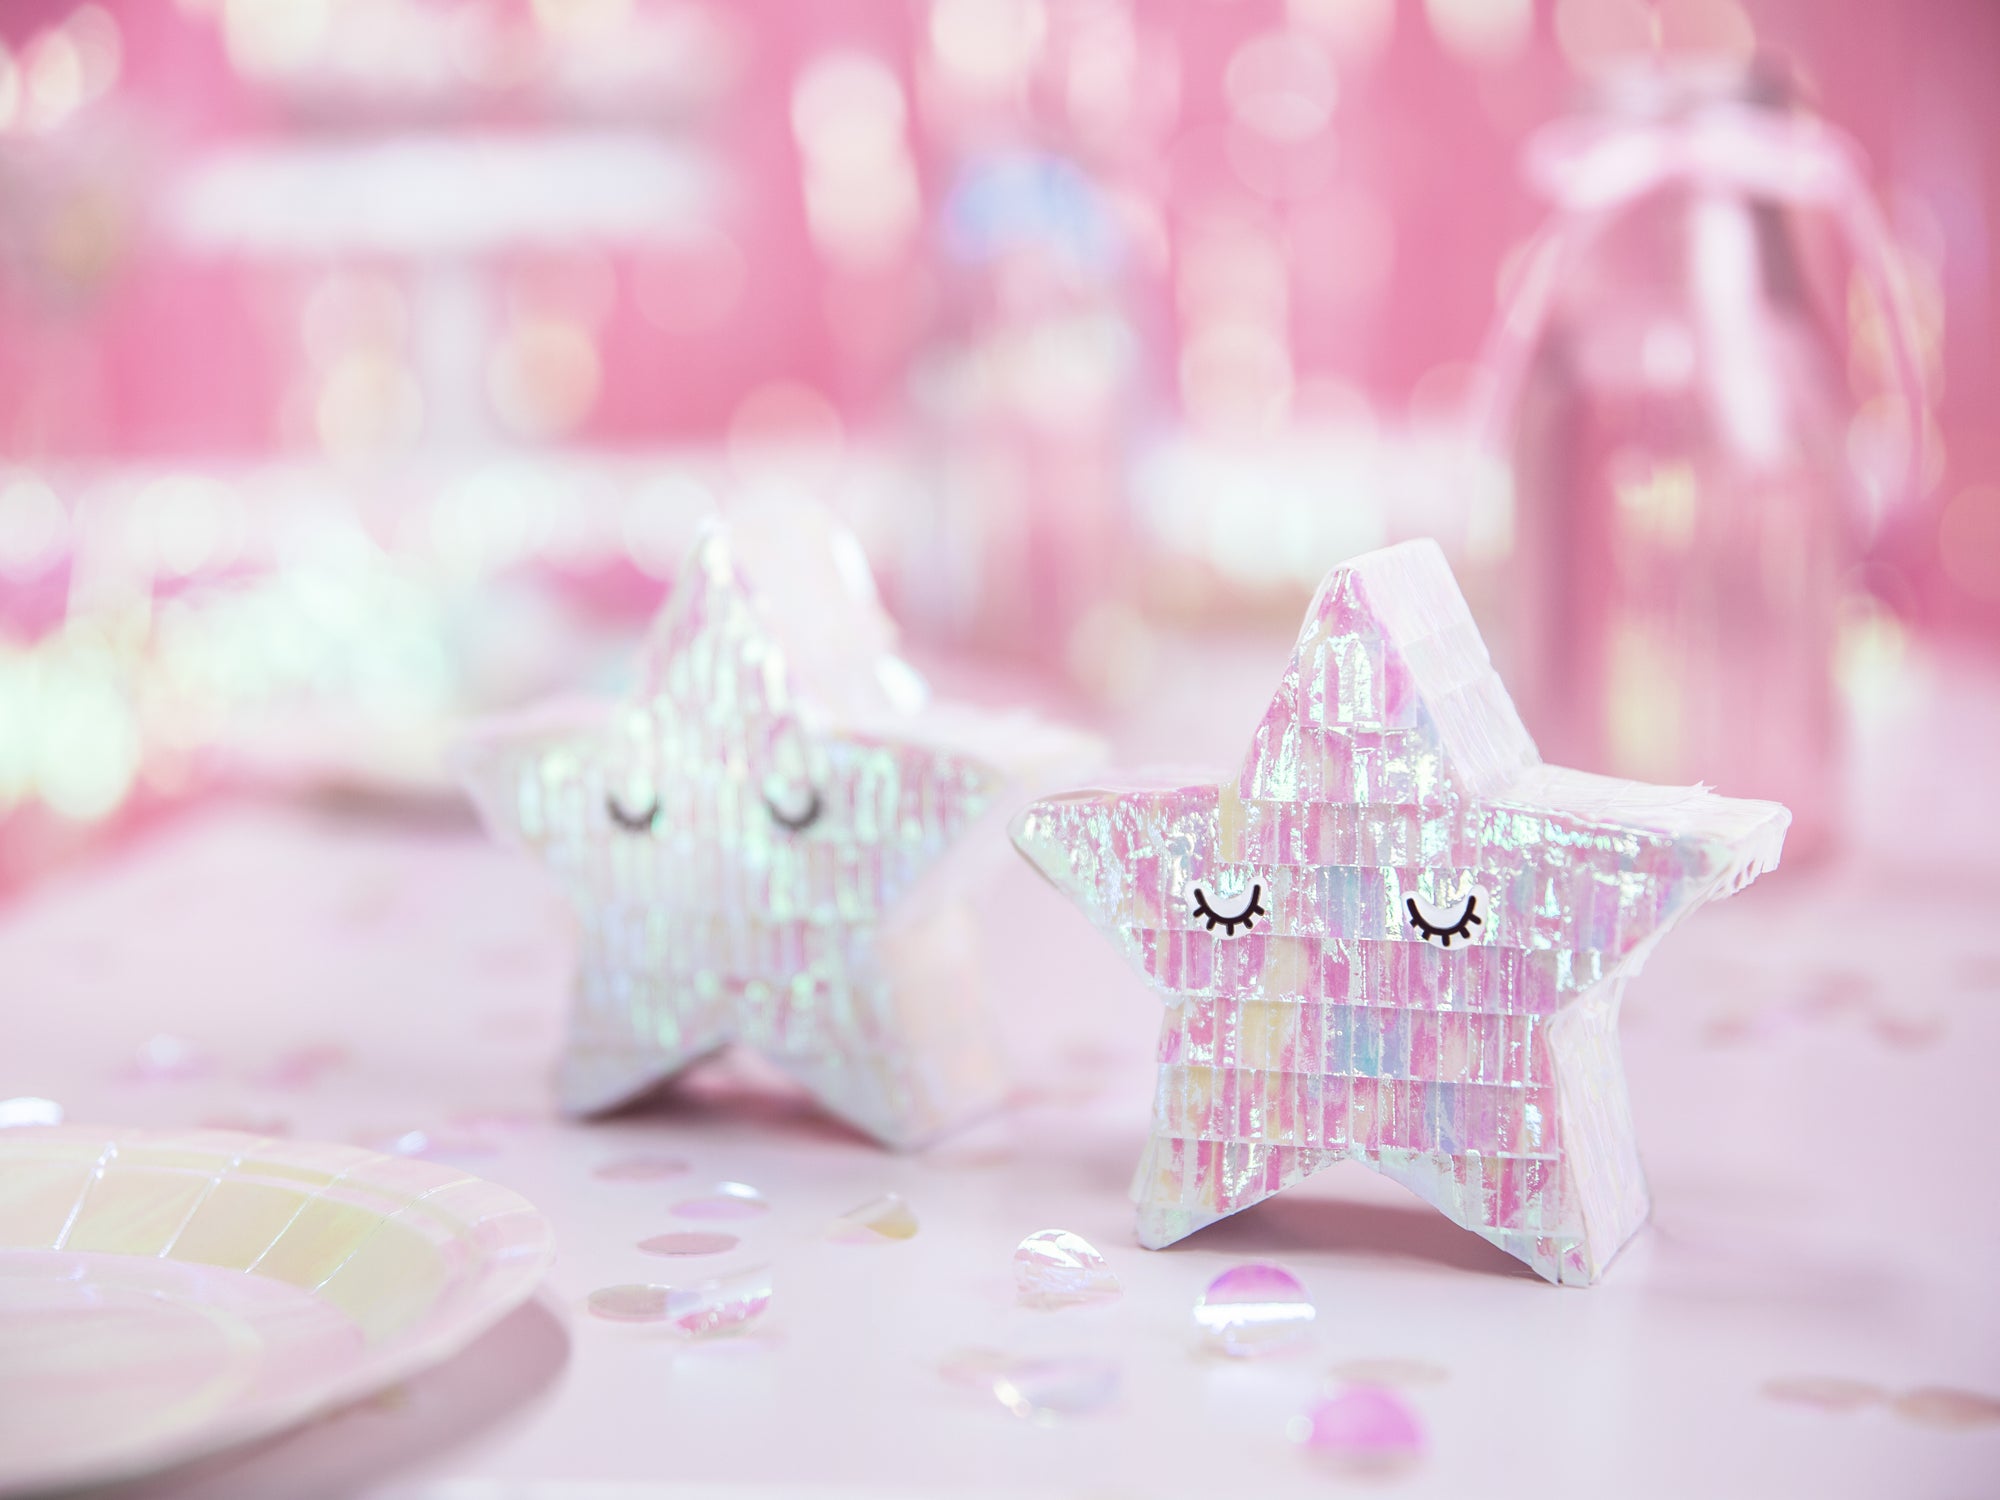 Mini Iridescent Star Piñata Party Favor | The Party Darling